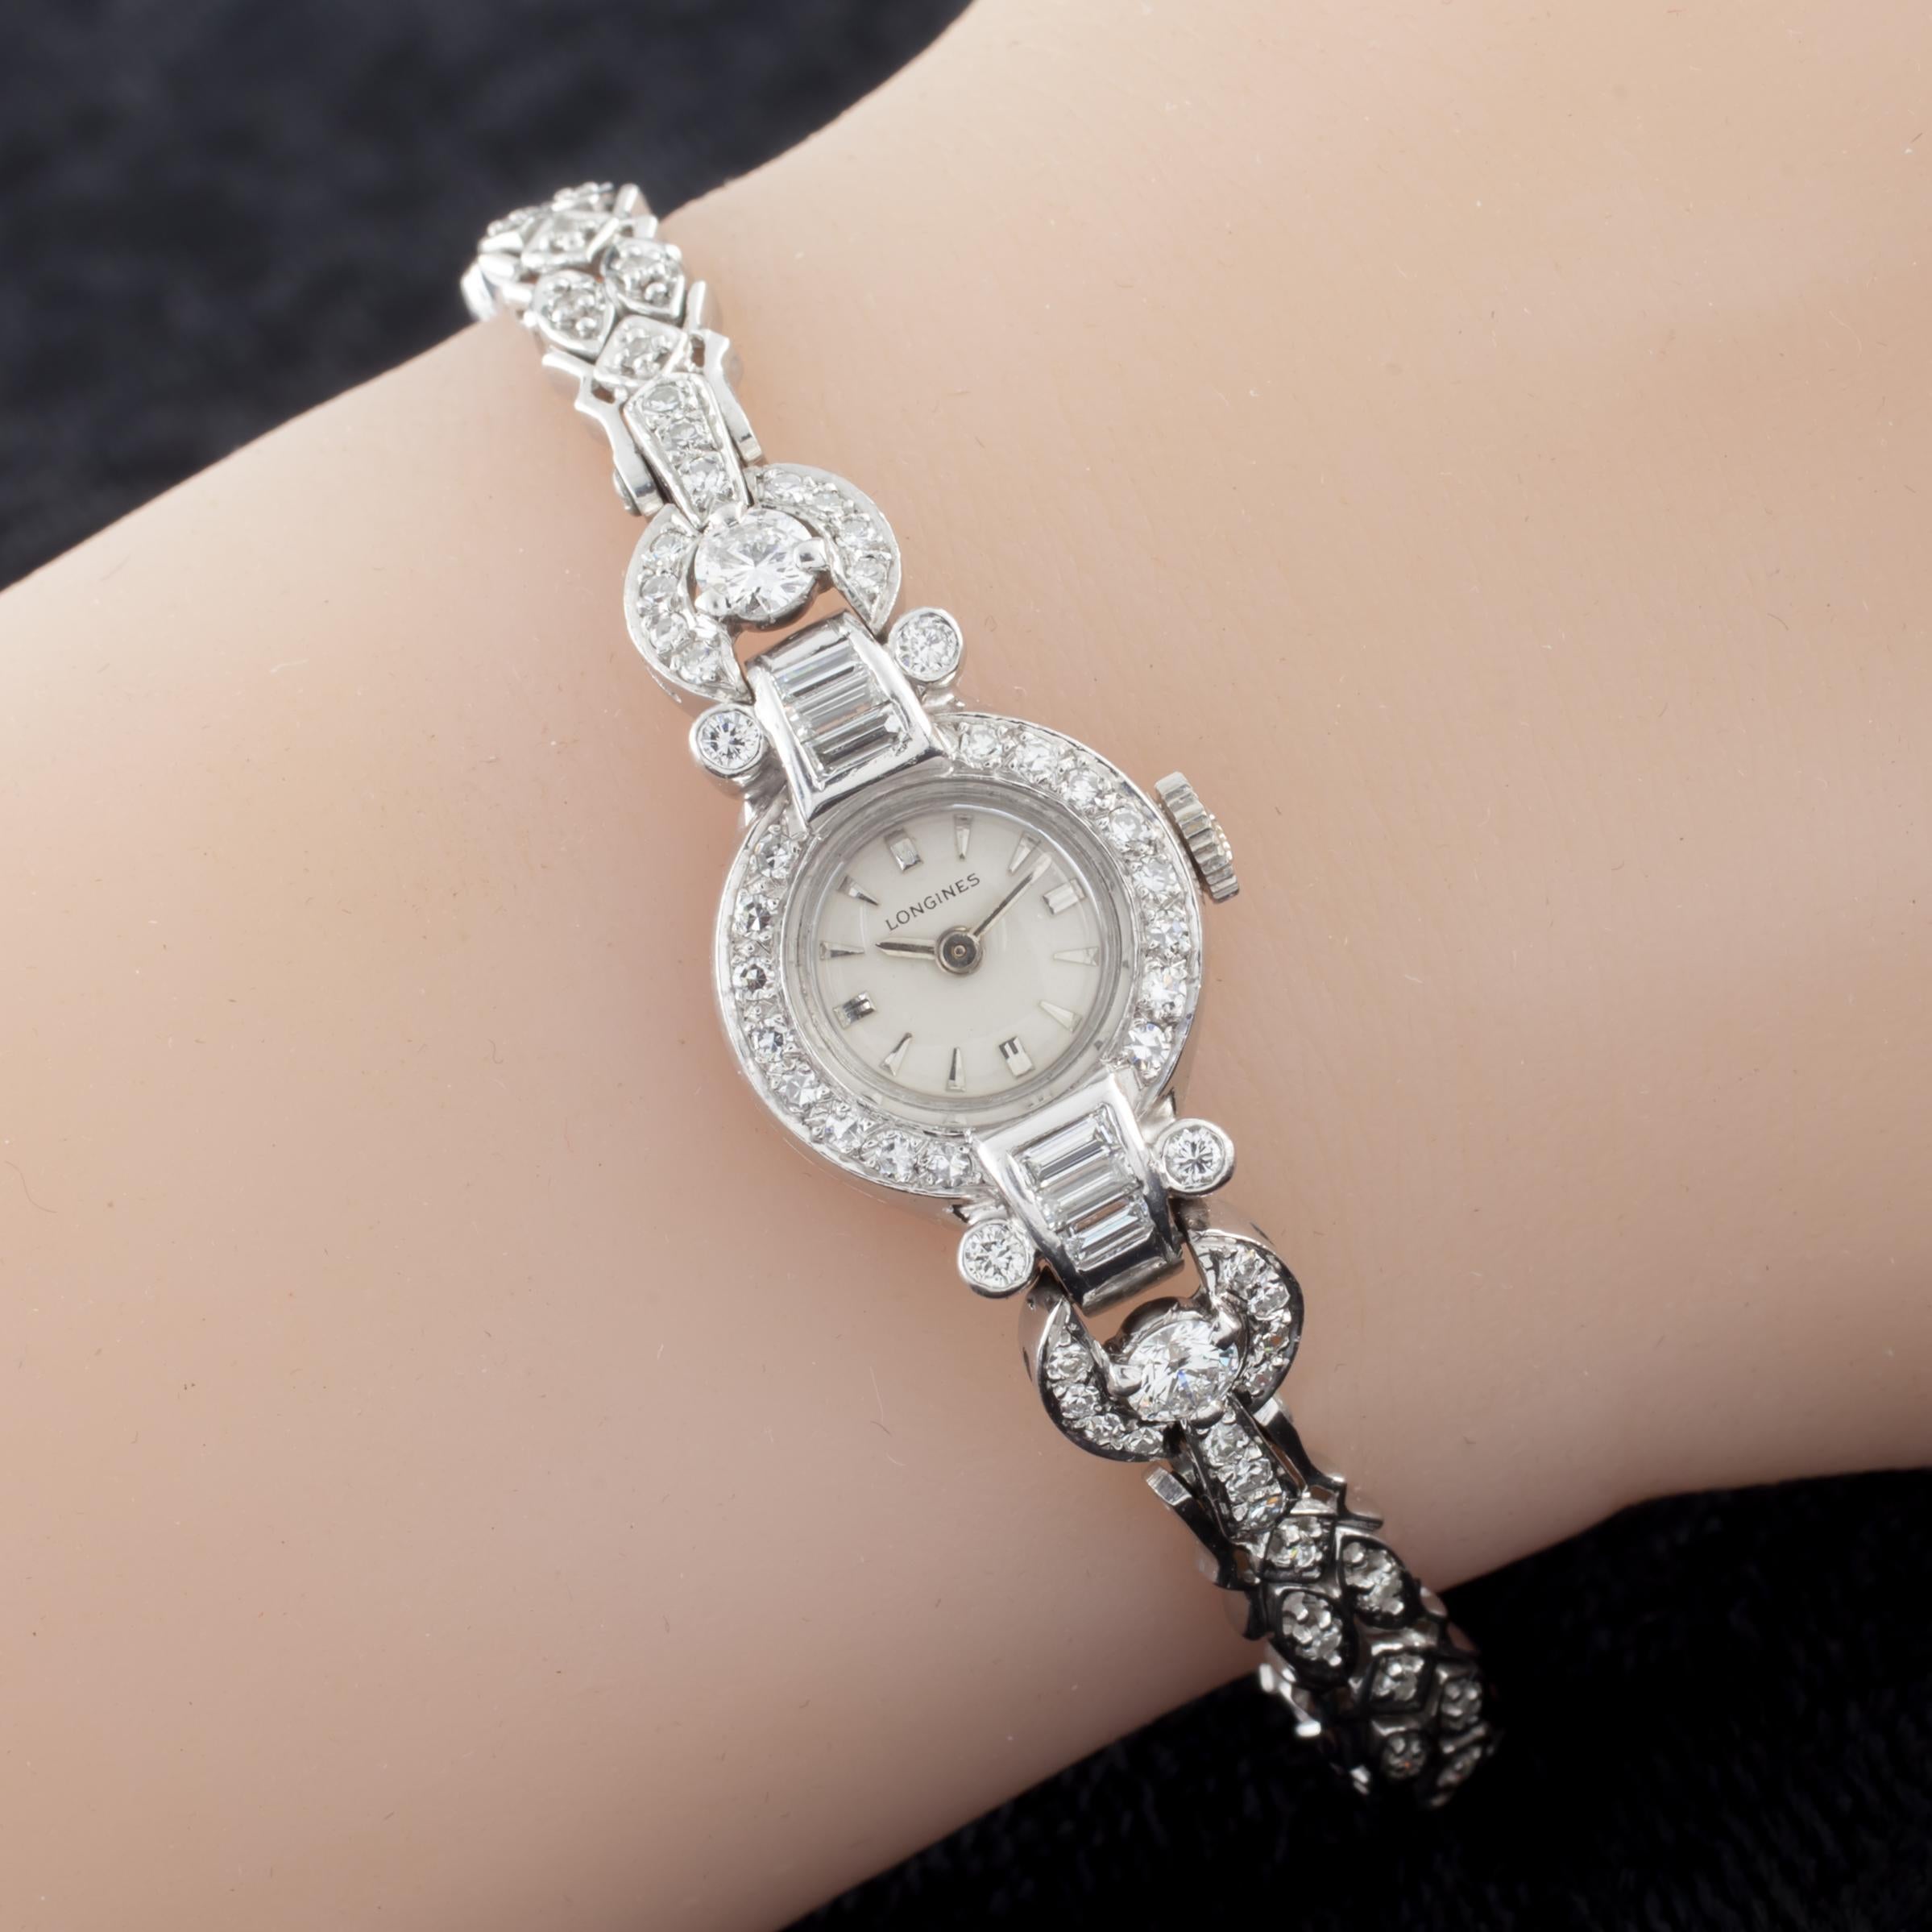 Longines Platinum & 14k White Gold Diamond Women's Dress Watch
Movement #4LLV
Serial #11926684
Total Diamond Weight = Approximately 2 carats

Platinum Case w/ Diamond Bezel and Lugs
12.7 grams
16 mm in Diameter (17 mm w/ Crown)
Lug-to-Lug Distance =